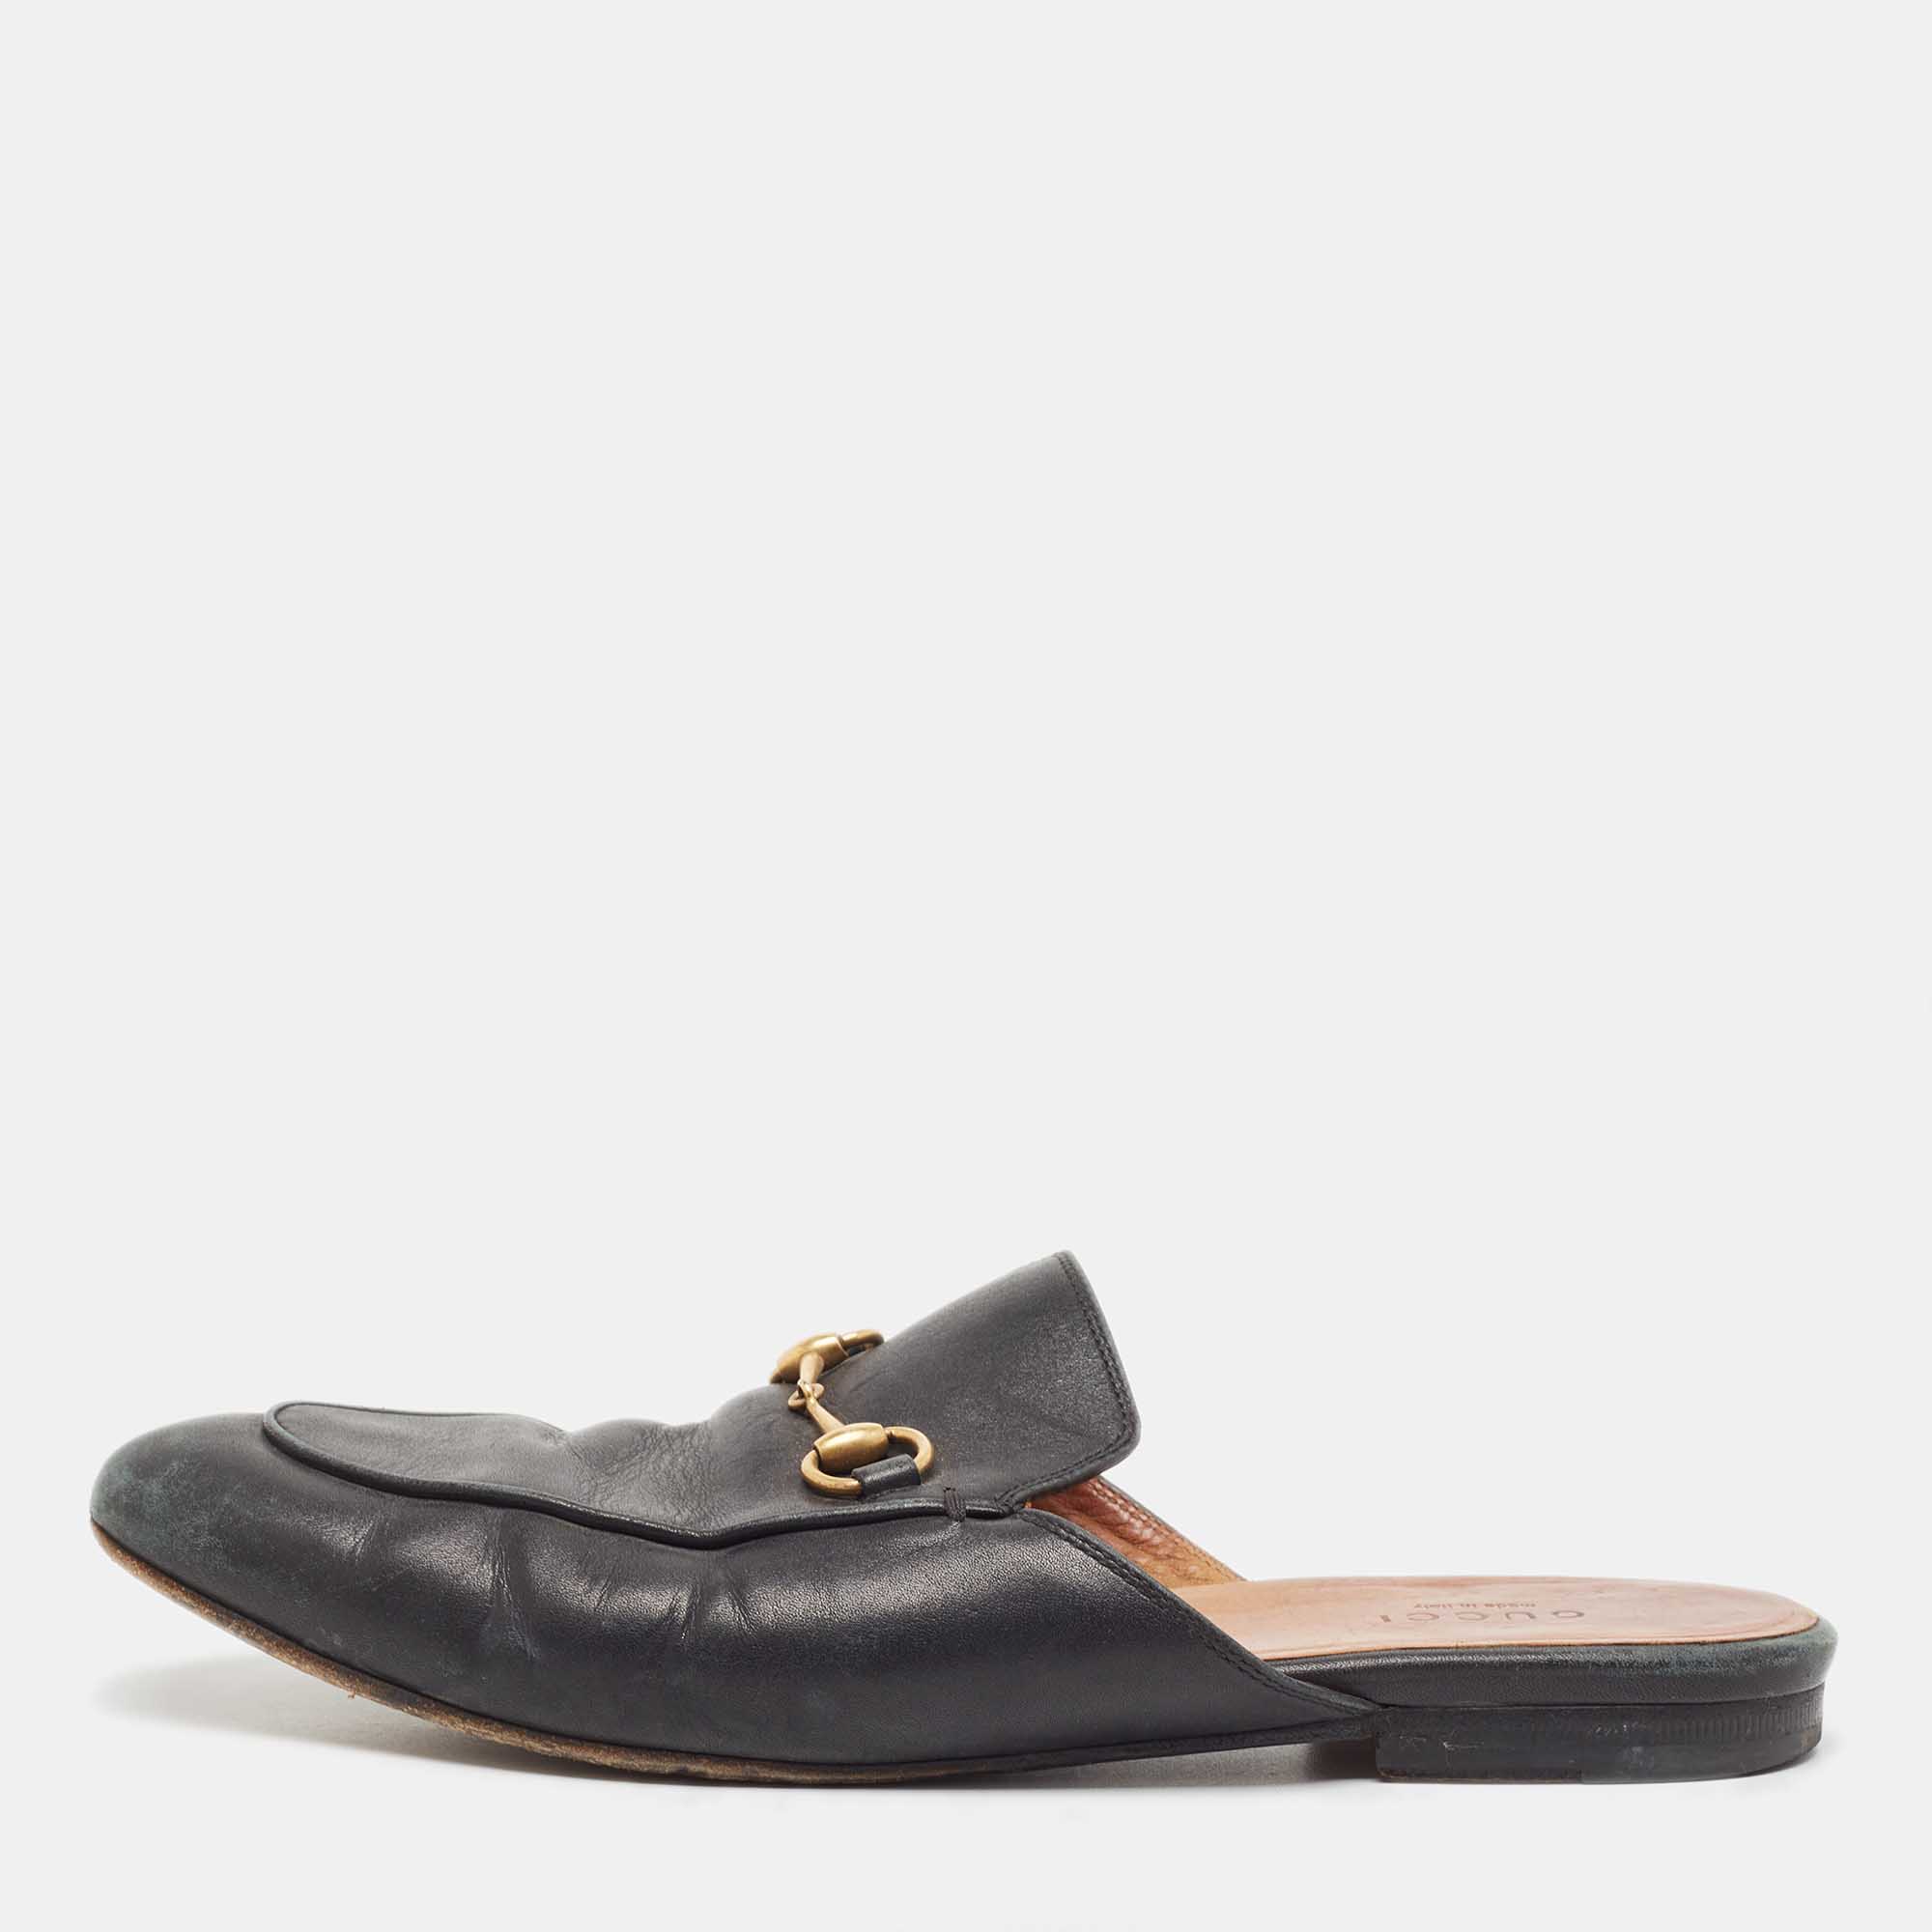 Gucci black leather princetown mules size 38.5 a